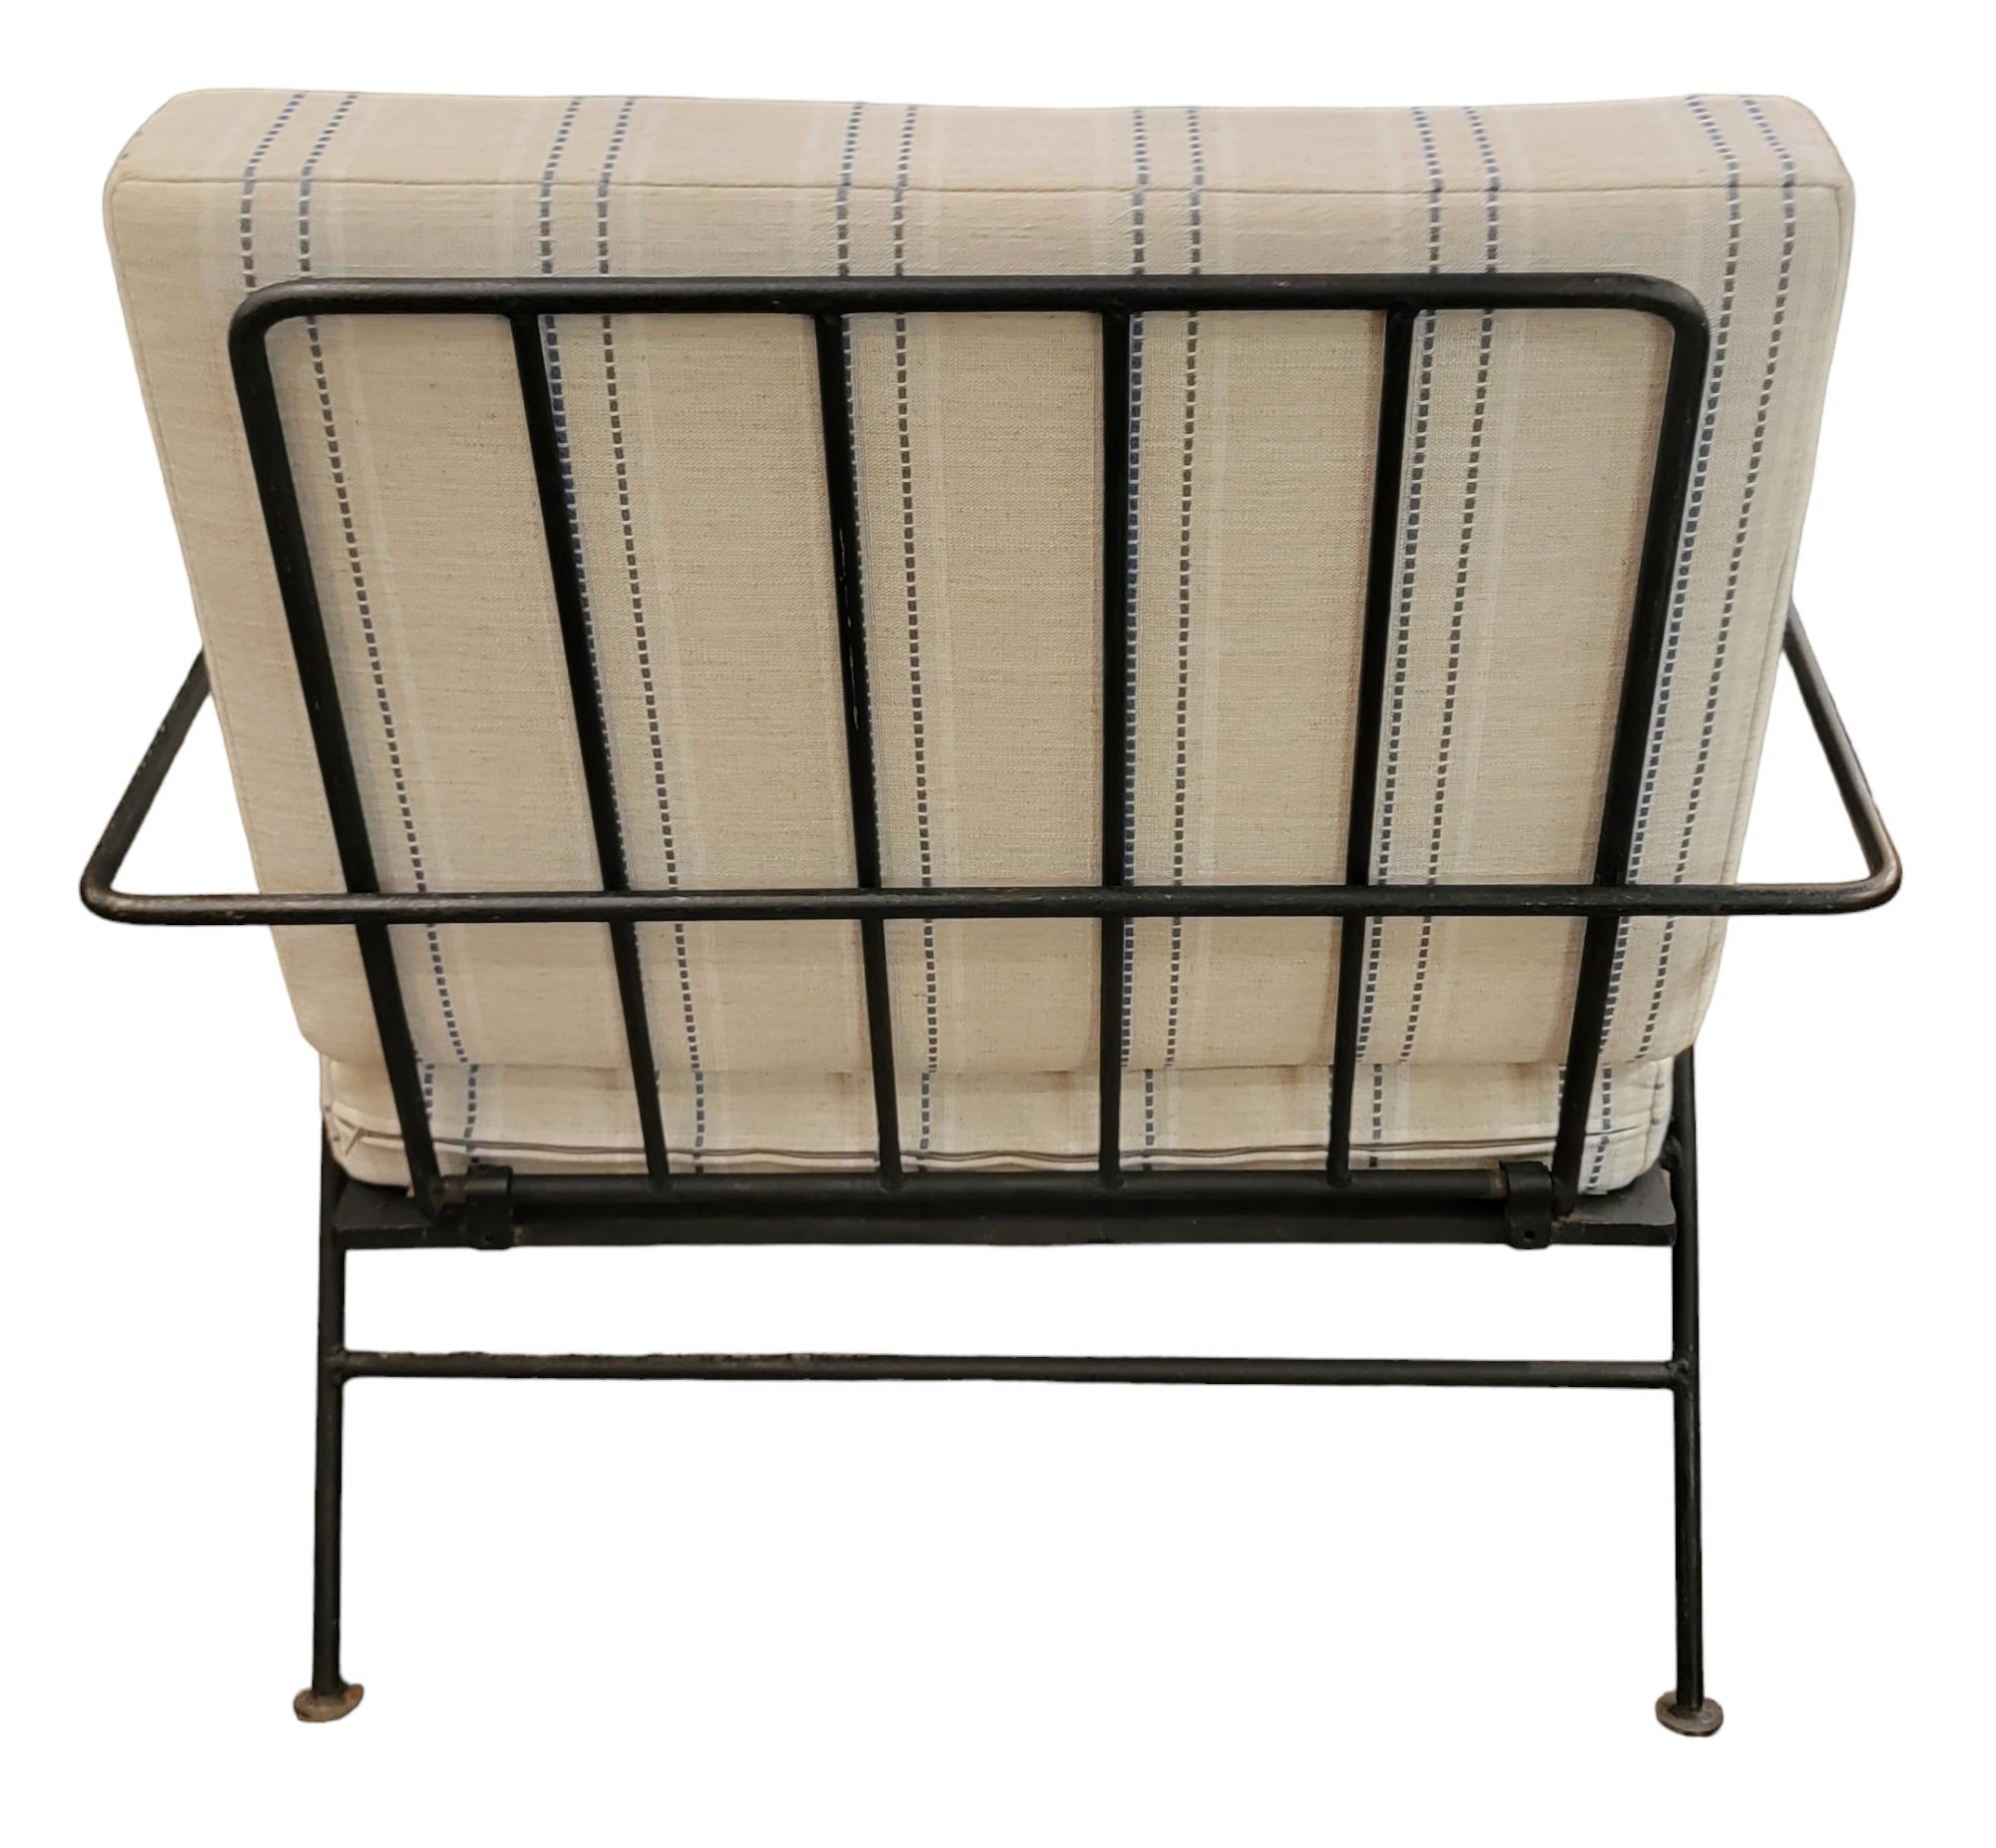 Mid Century Iron Lounge Chair with custom cushion in a blue and strip ticking like material. Great for indoor or outdoor. Back of seat folds in for easier safekeeping/moving. Measures approx - 29w x29d x30.5h seat height 16